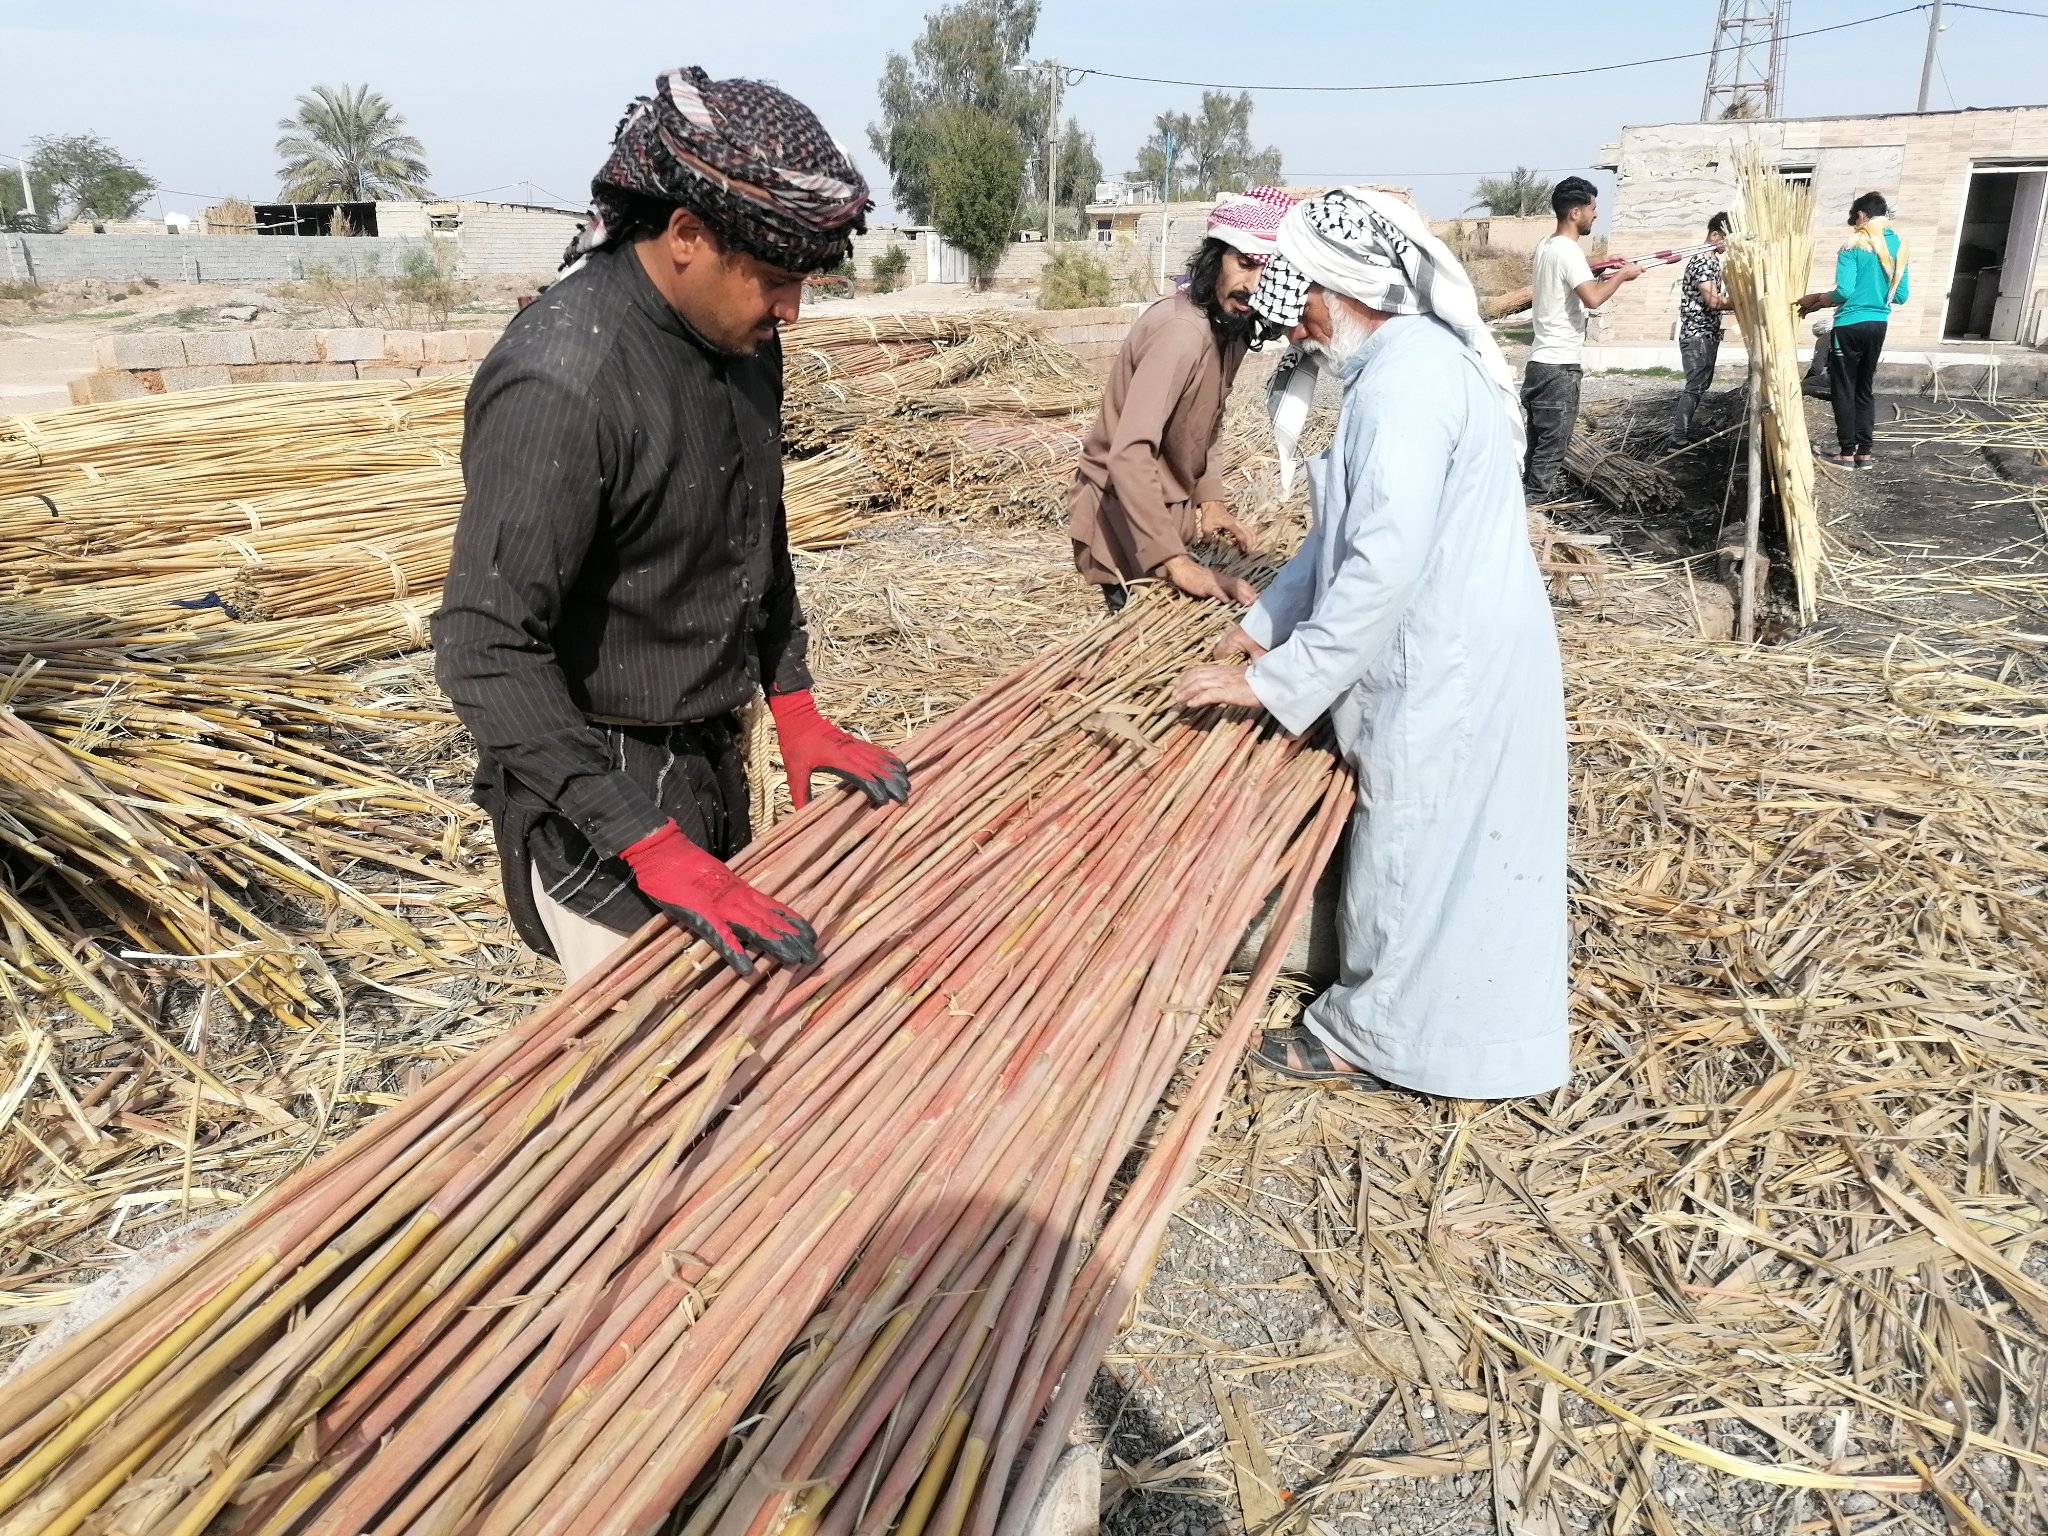 Reeds, known as mxx were used by Arabs living in Iran's marshalnads to build their homes